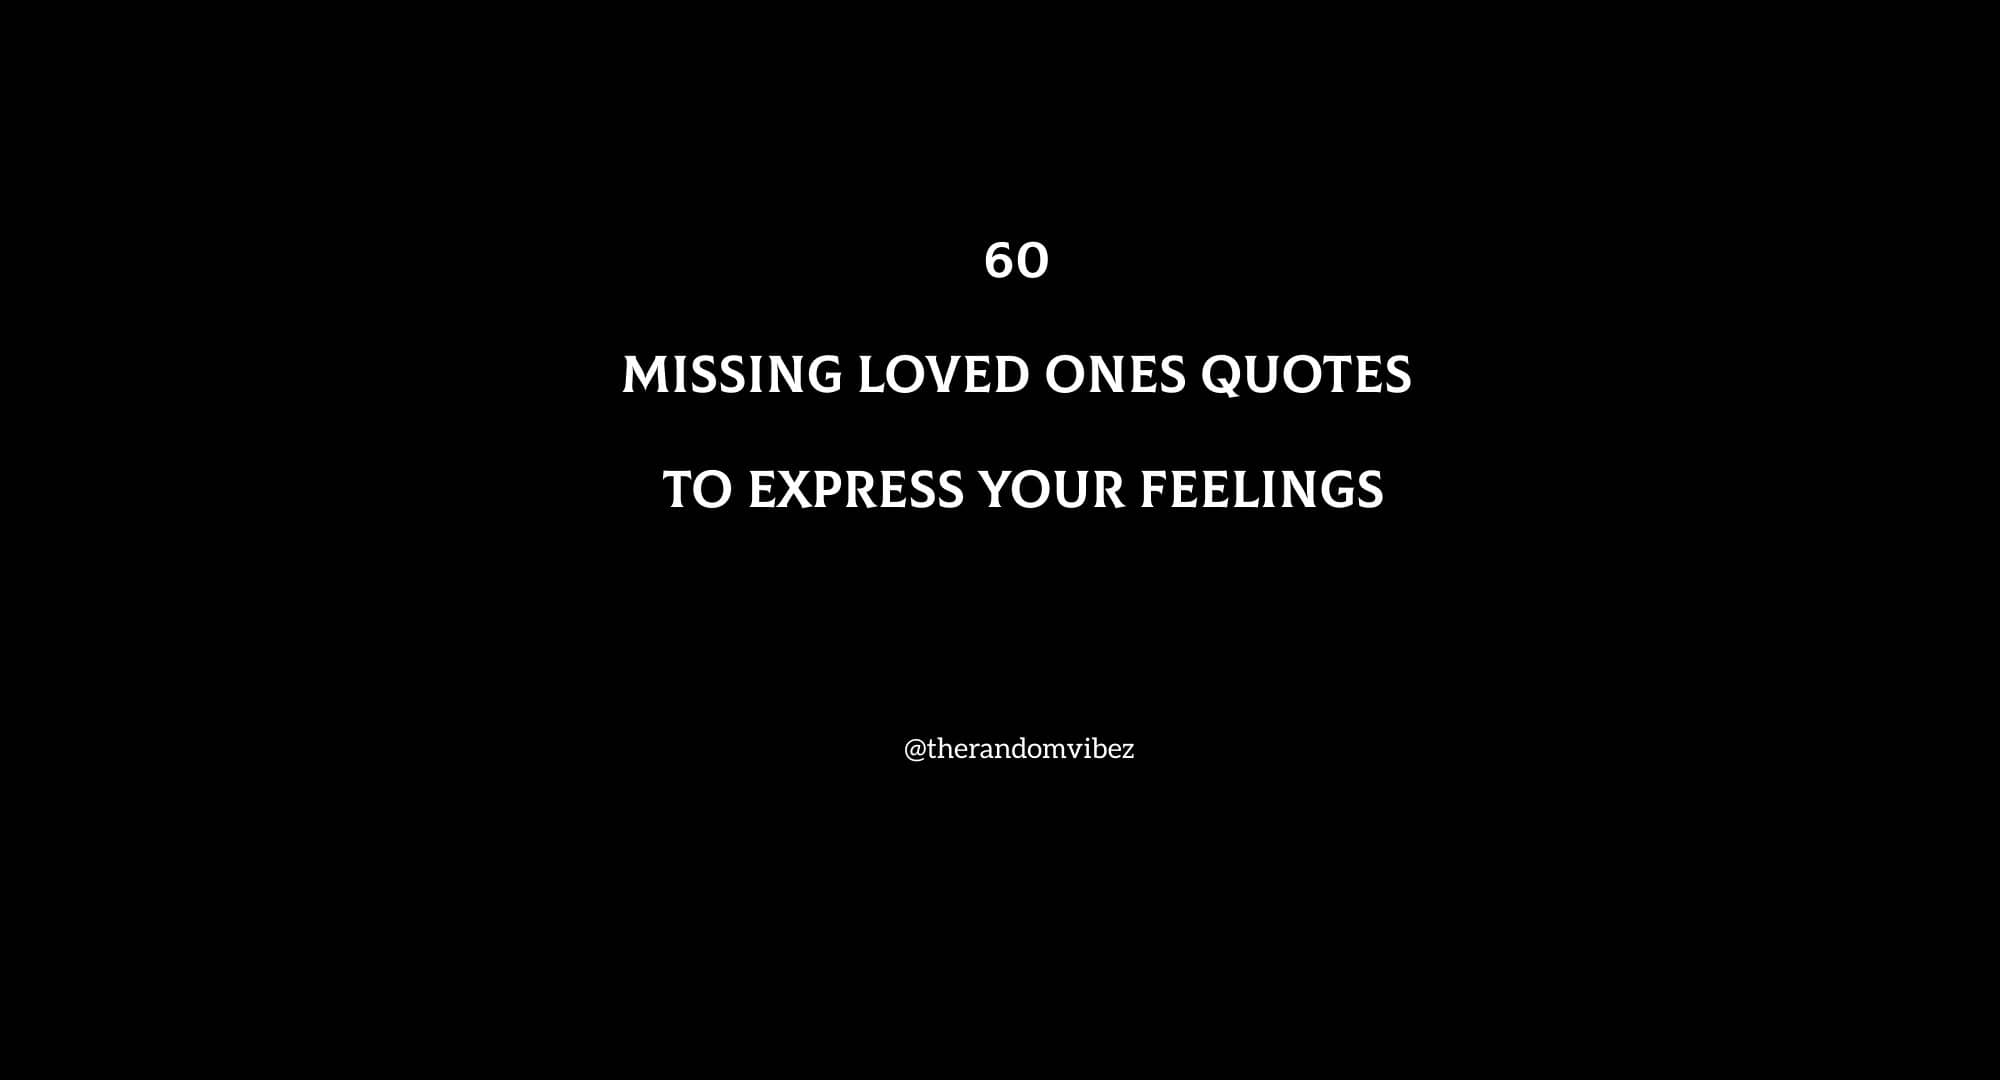 60 Missing Loved Ones Quotes To Express Your Feelings